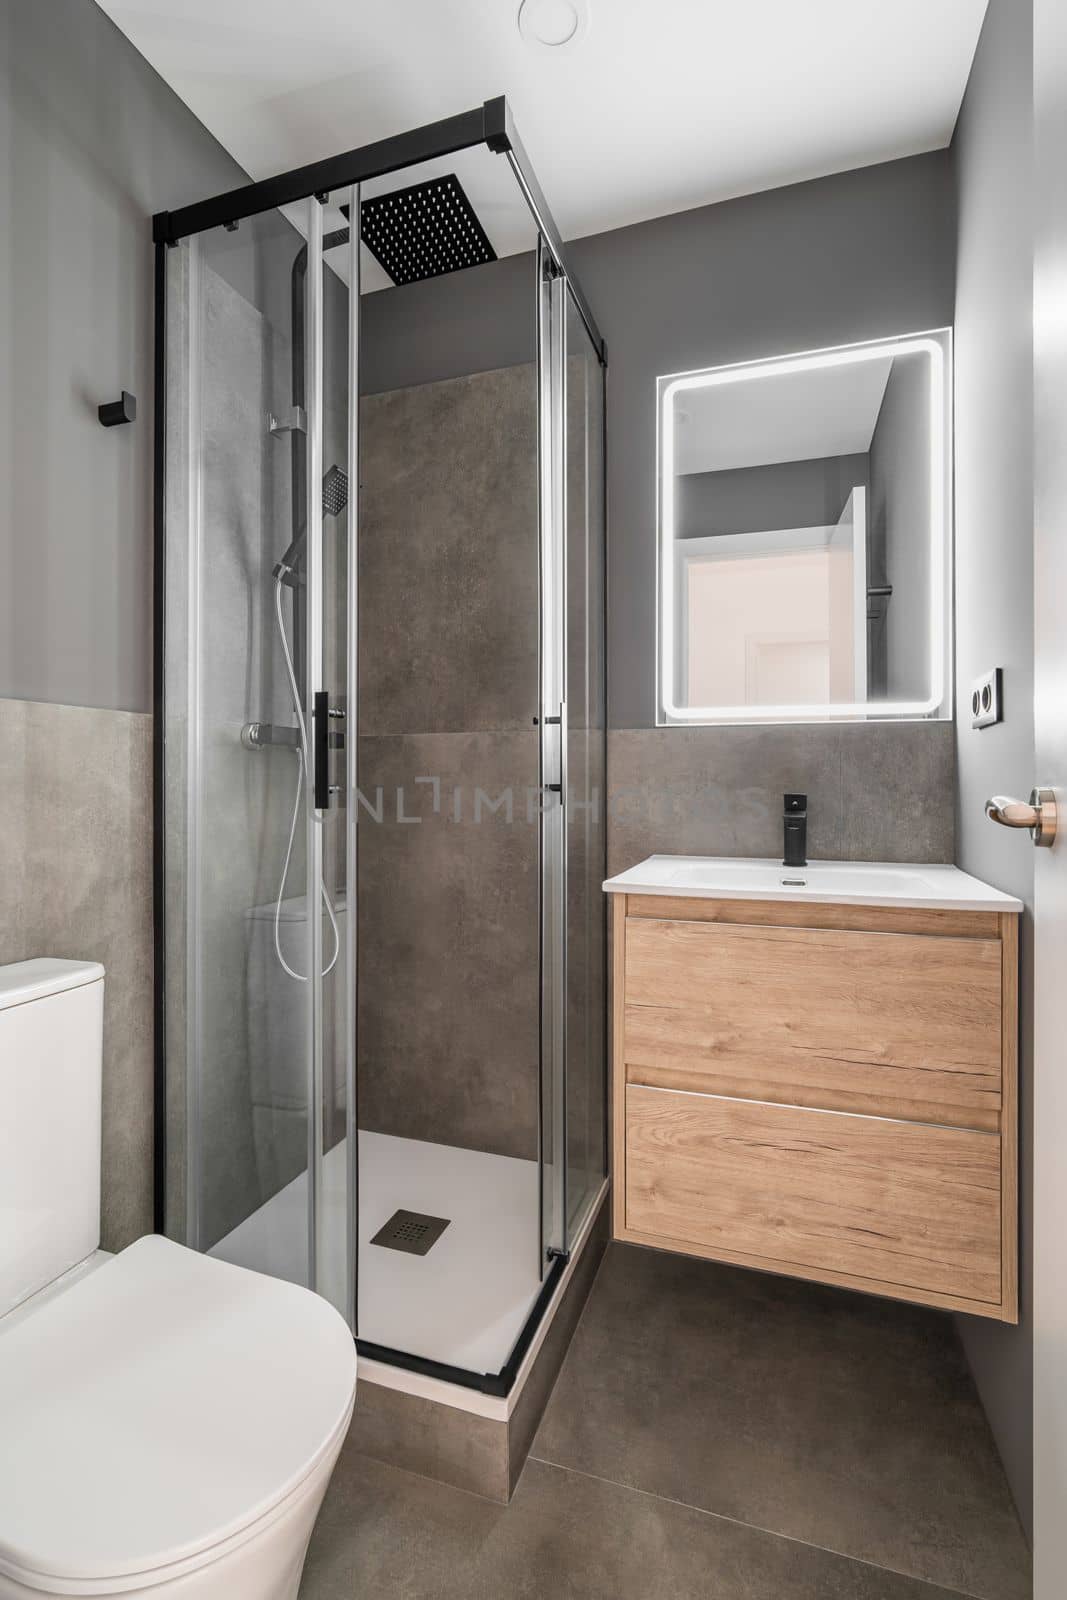 Small bathroom in a modern design with bright lighting. Shower cabin made of ergonomic glass with black faucet. Vanity table with wooden drawers and white sink is in harmony with overall design. by apavlin